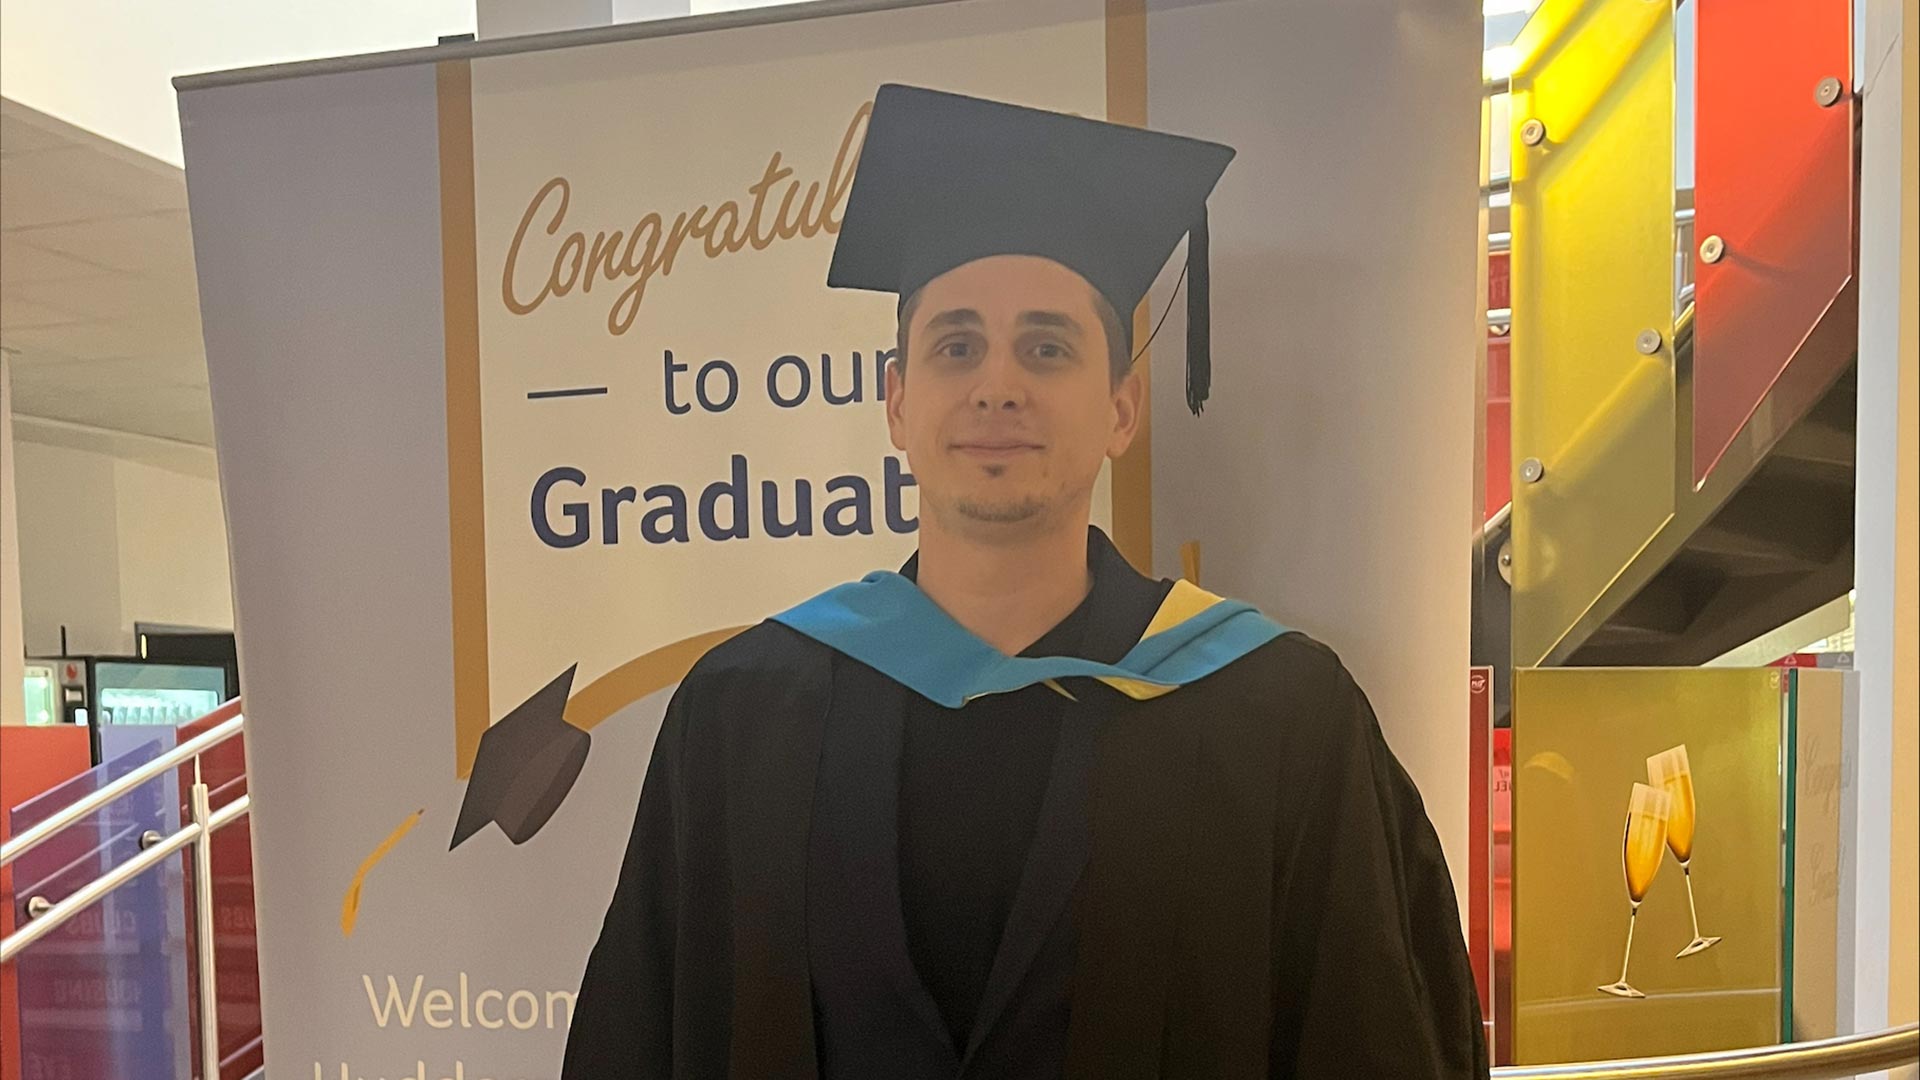 Stefano stood in front of a graduation pull up banner. He is wearing a graduation hat and gown.